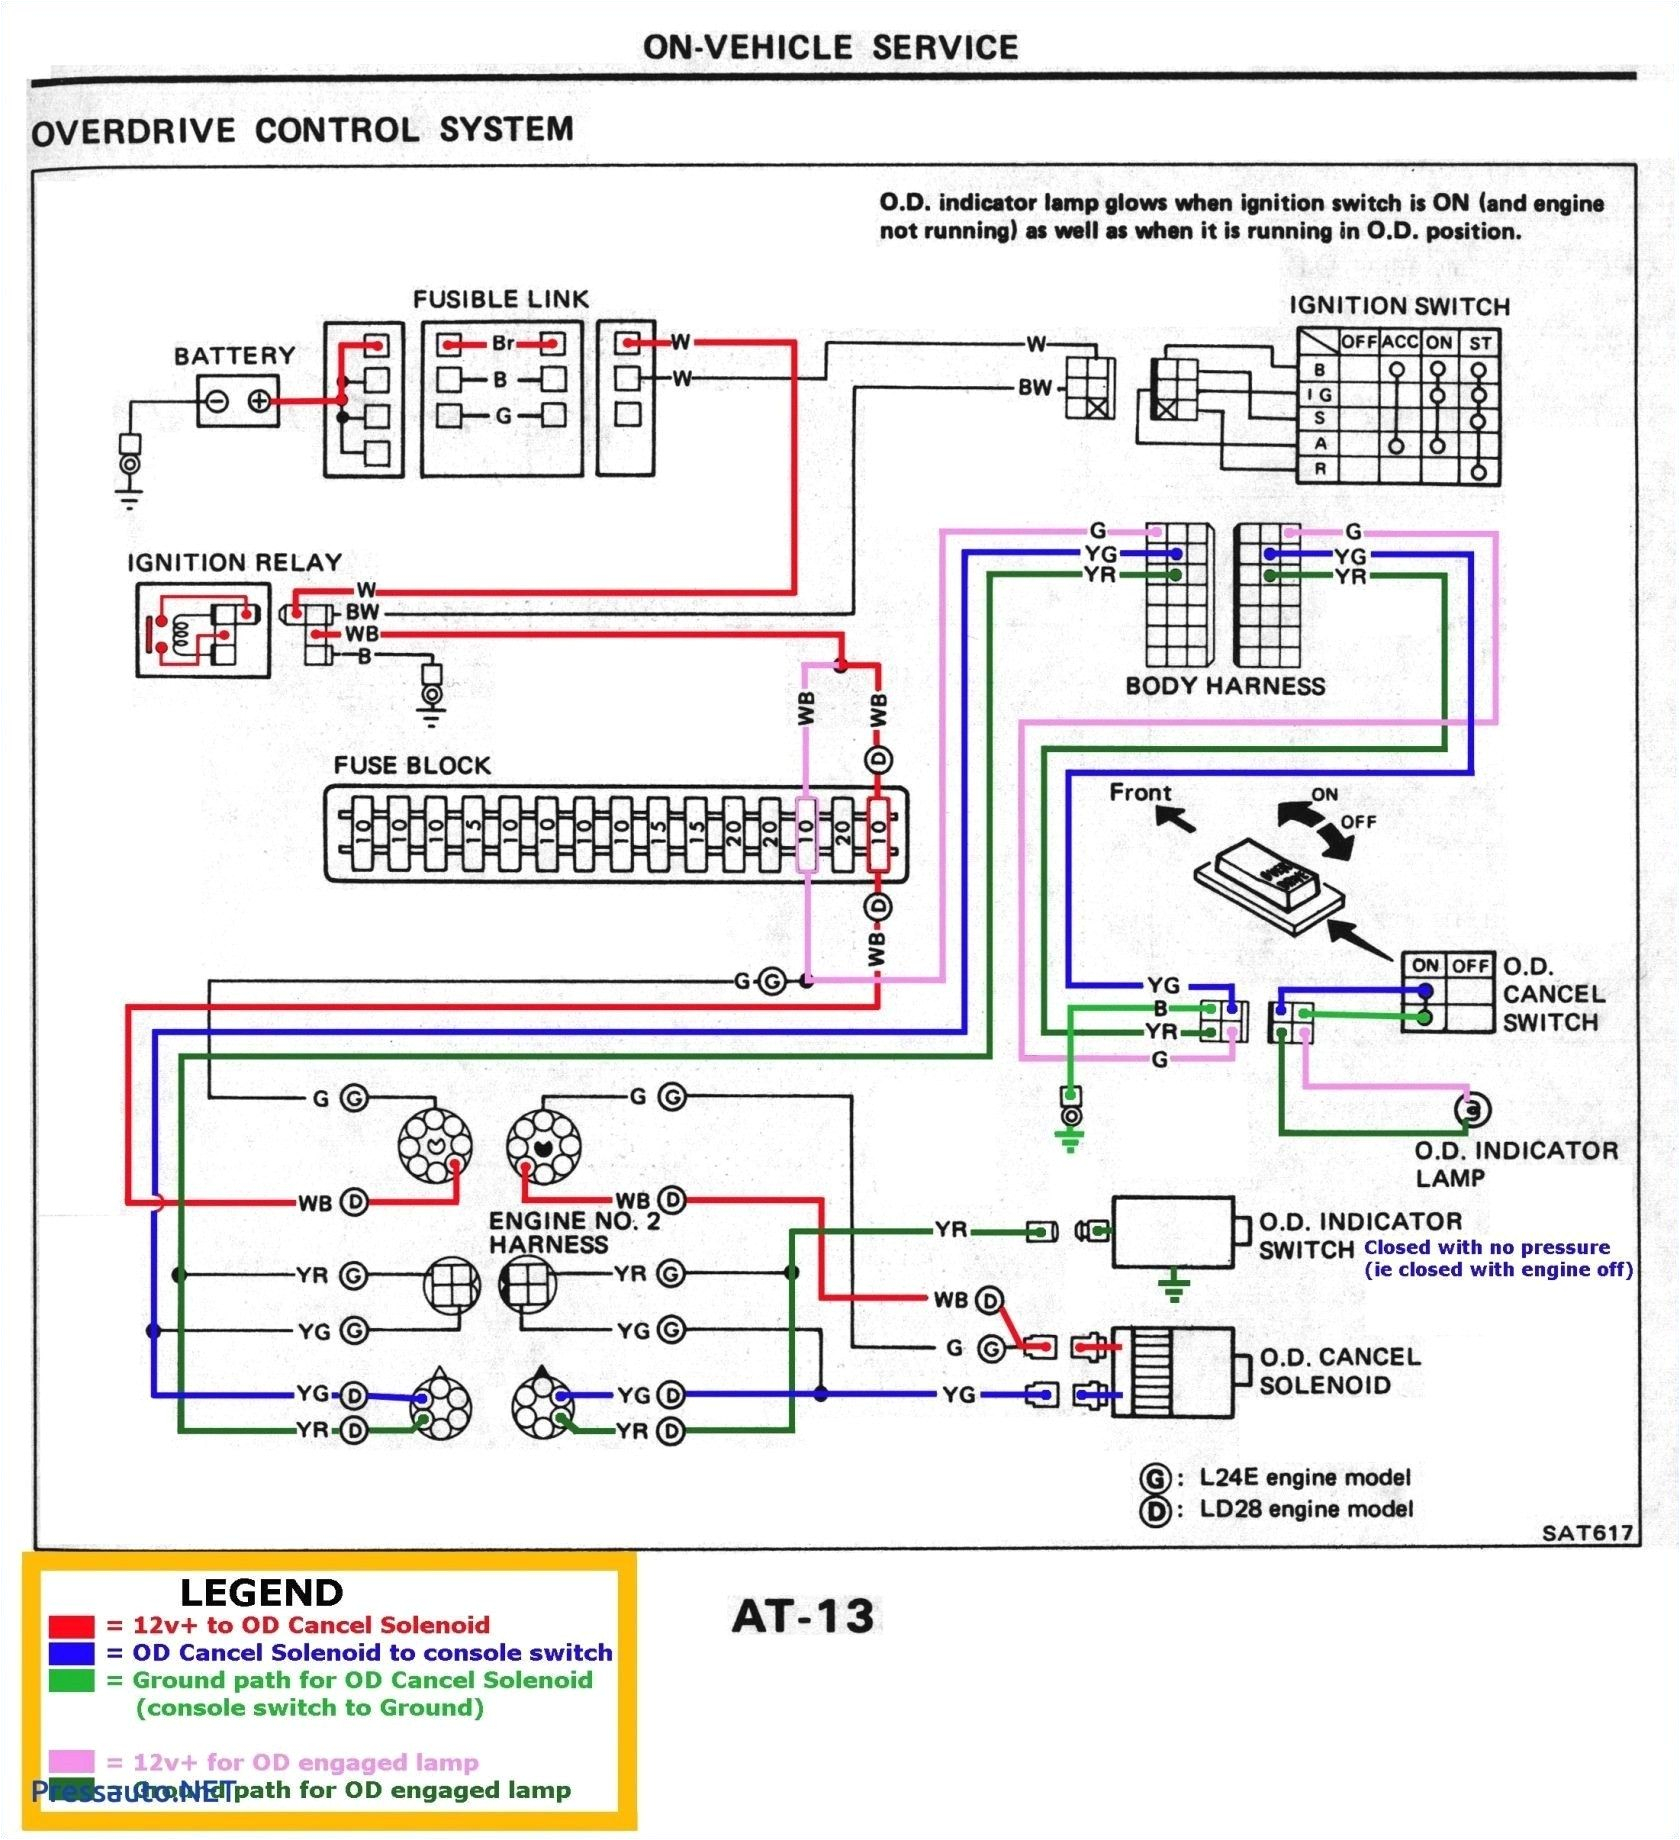 Chevy Trailer Plug Wiring Diagram Inspirational Wiring Diagram for Rock Lights Diagrams